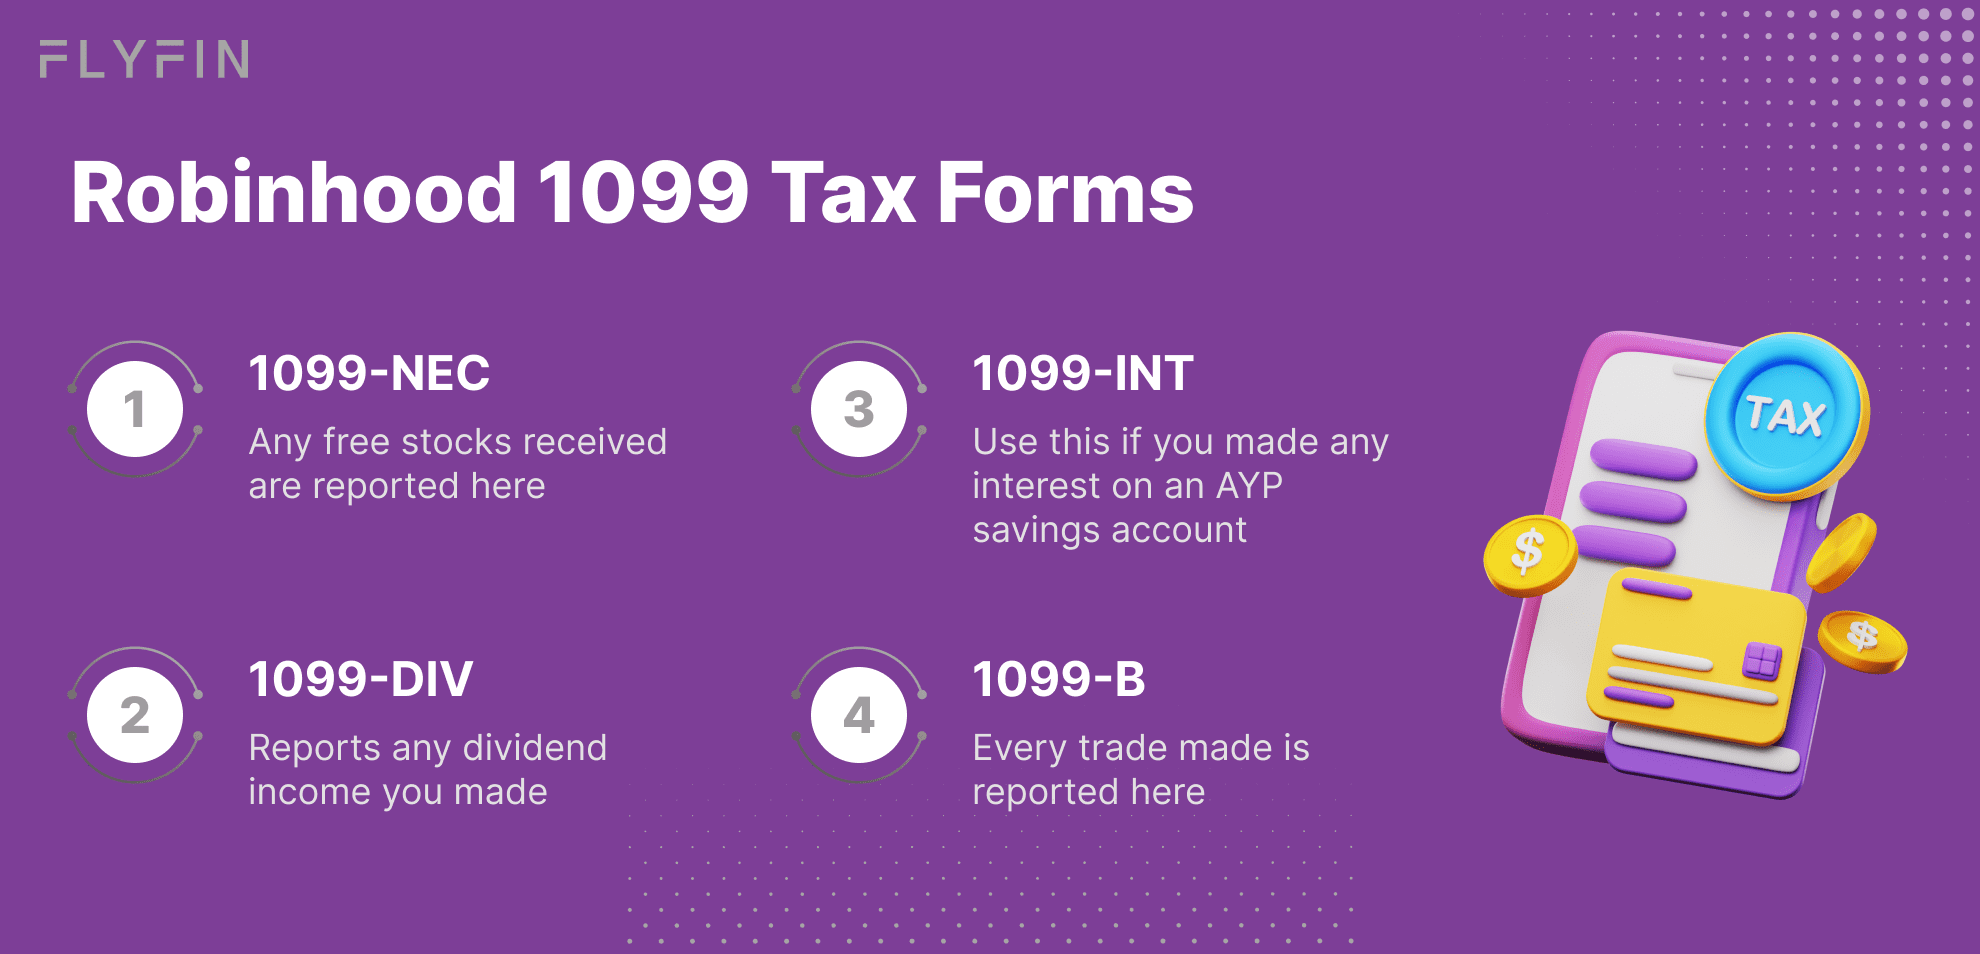 Infographic entitled Robinhood 1099 Tax Forms listing four 1099 important forms for filing Robinhood taxes.